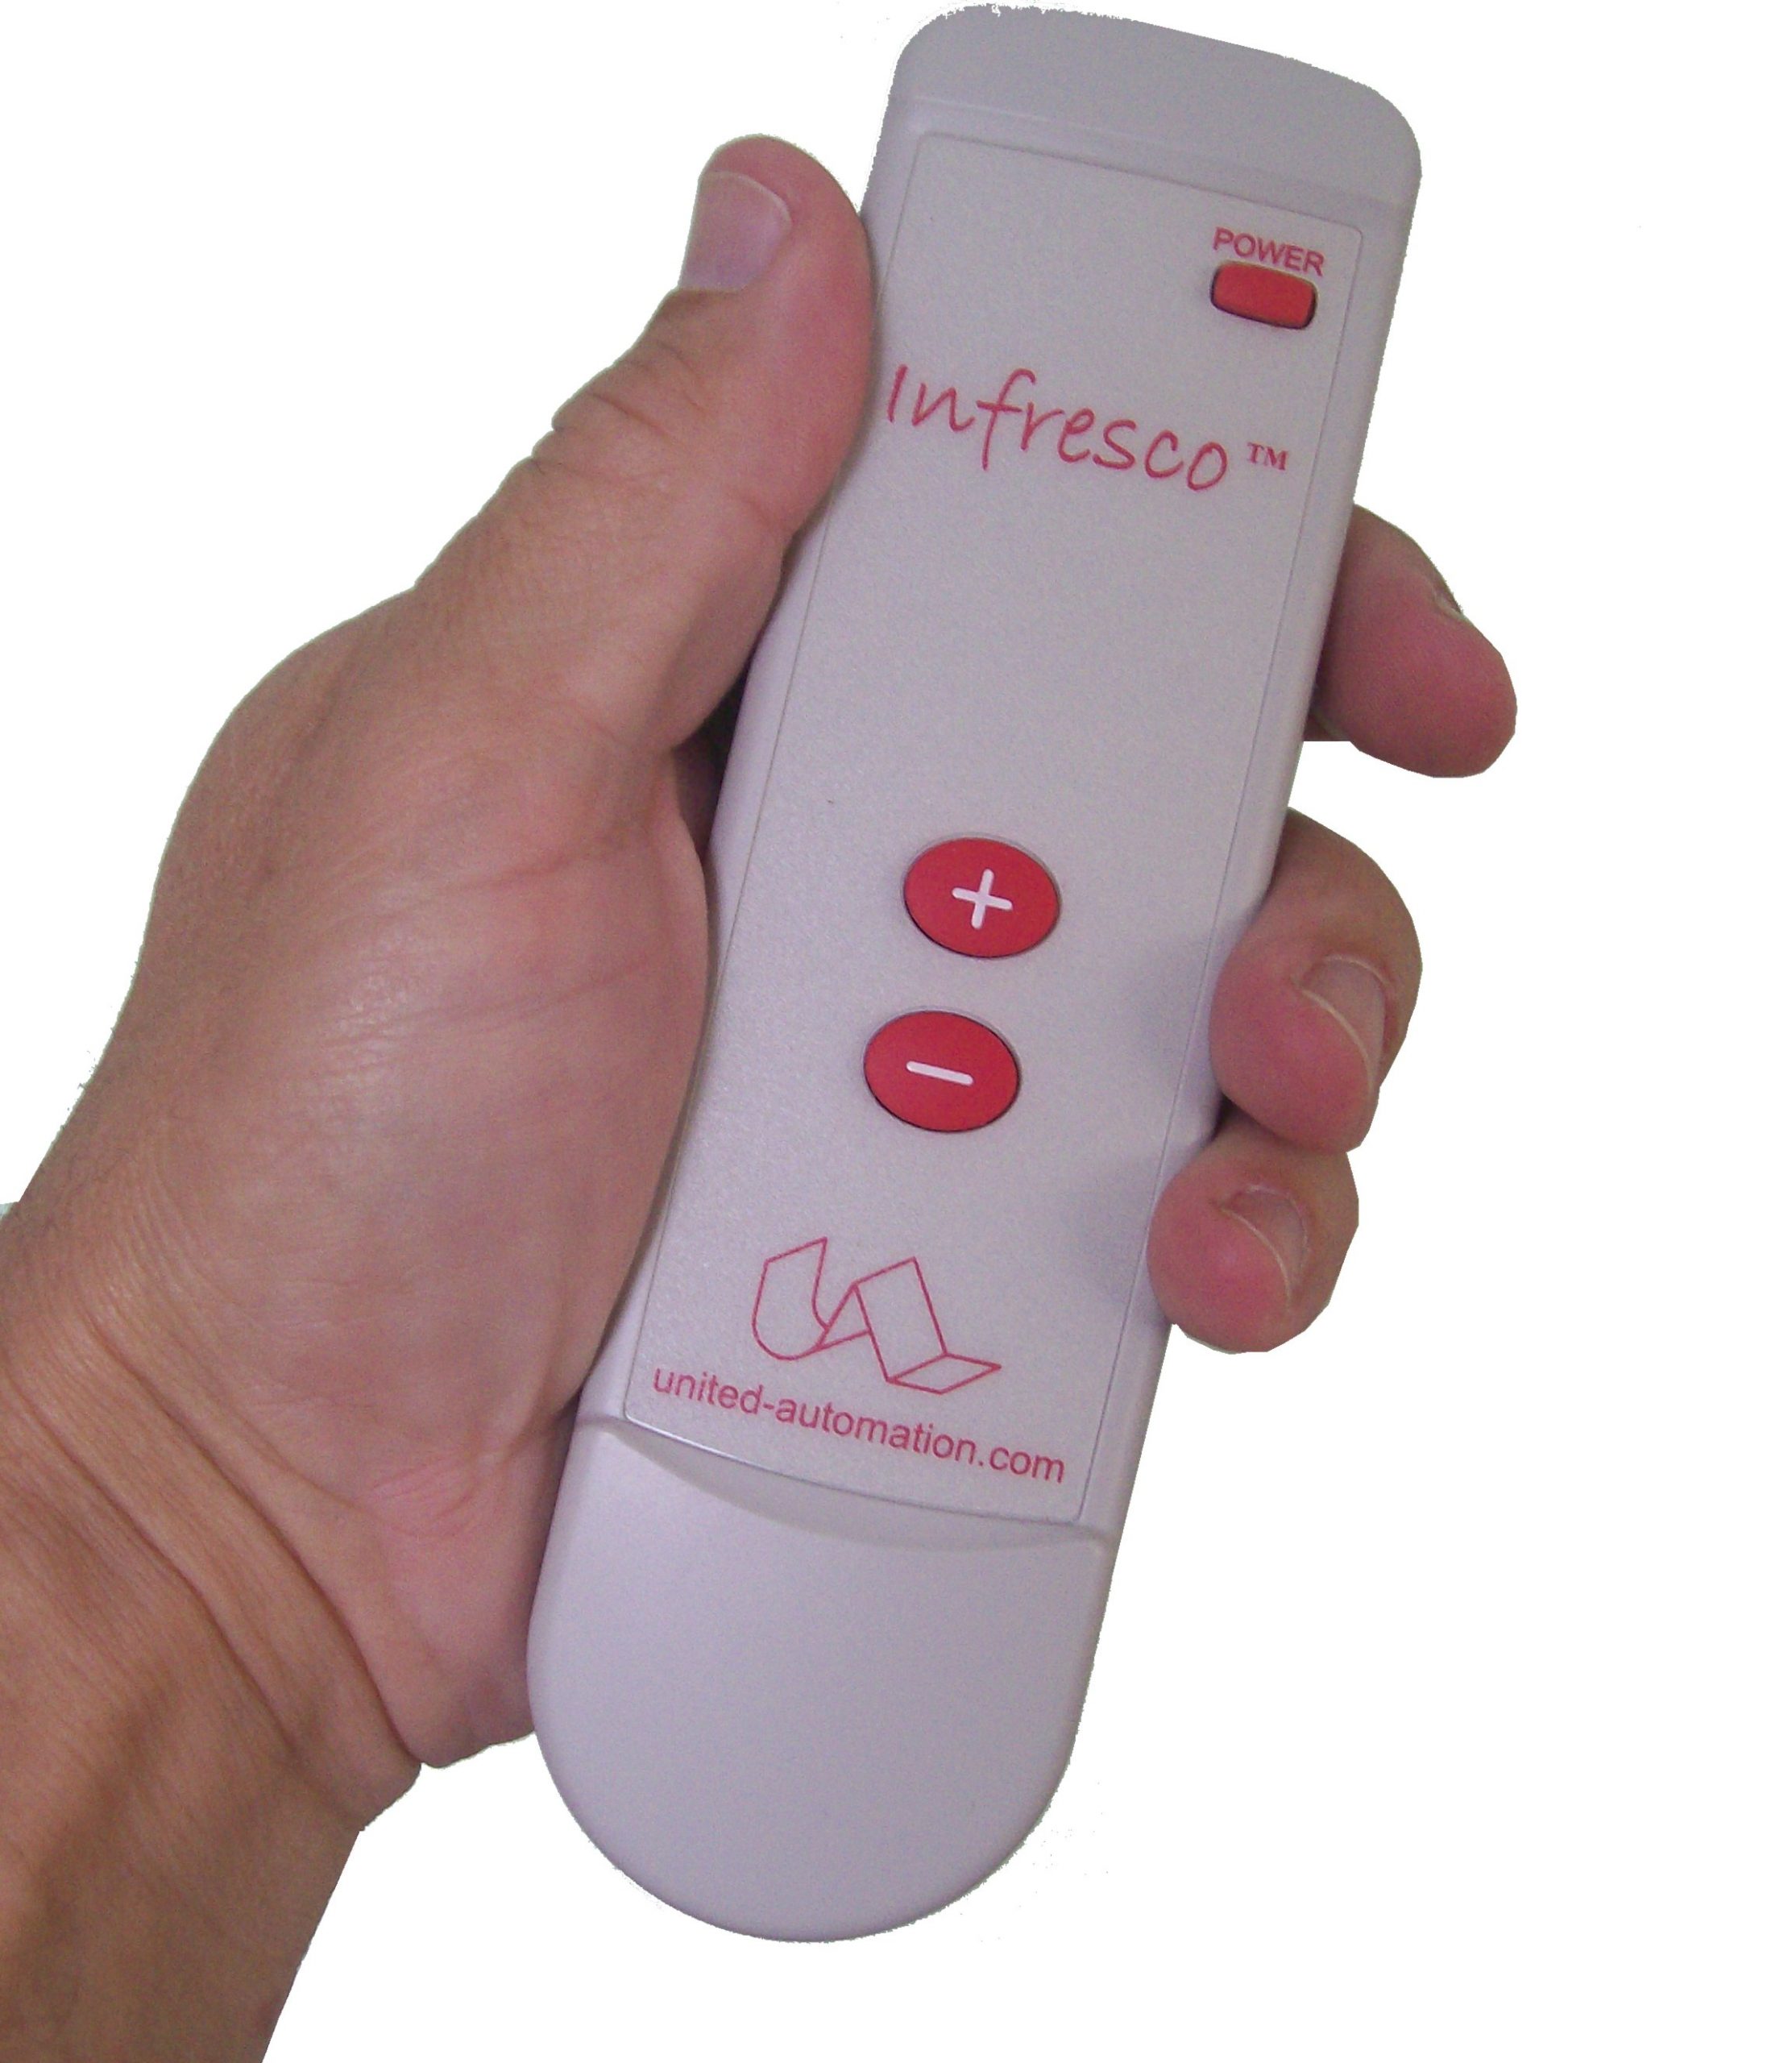 Infresco Remote Control for Infra Red Heaters